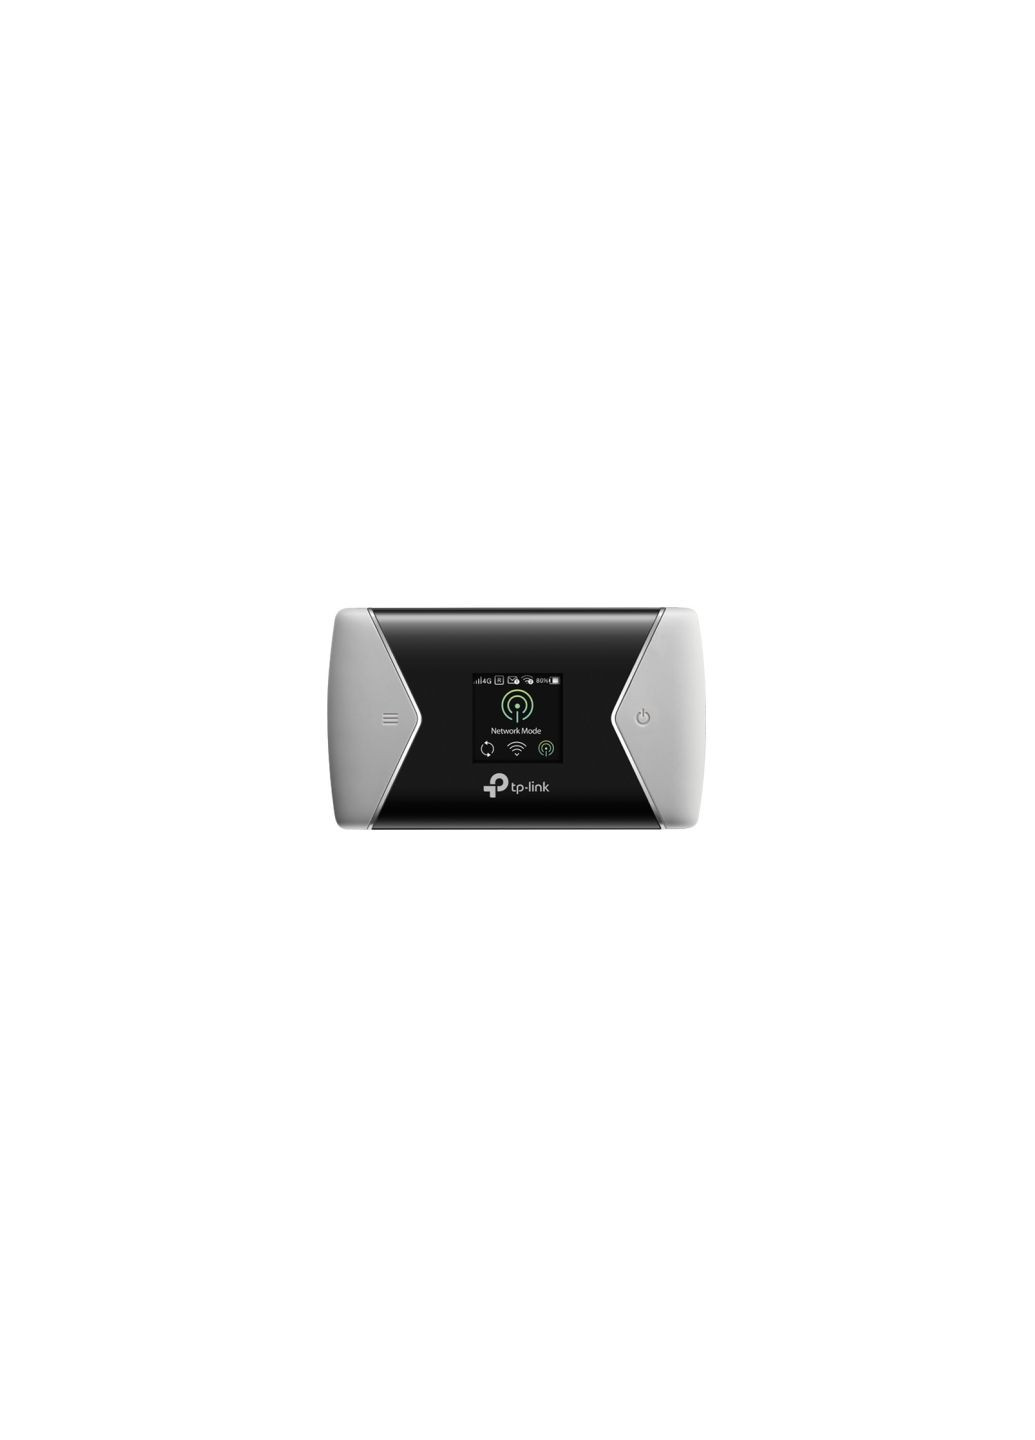 Маршрутизатор TP-Link m7450 (276905604)